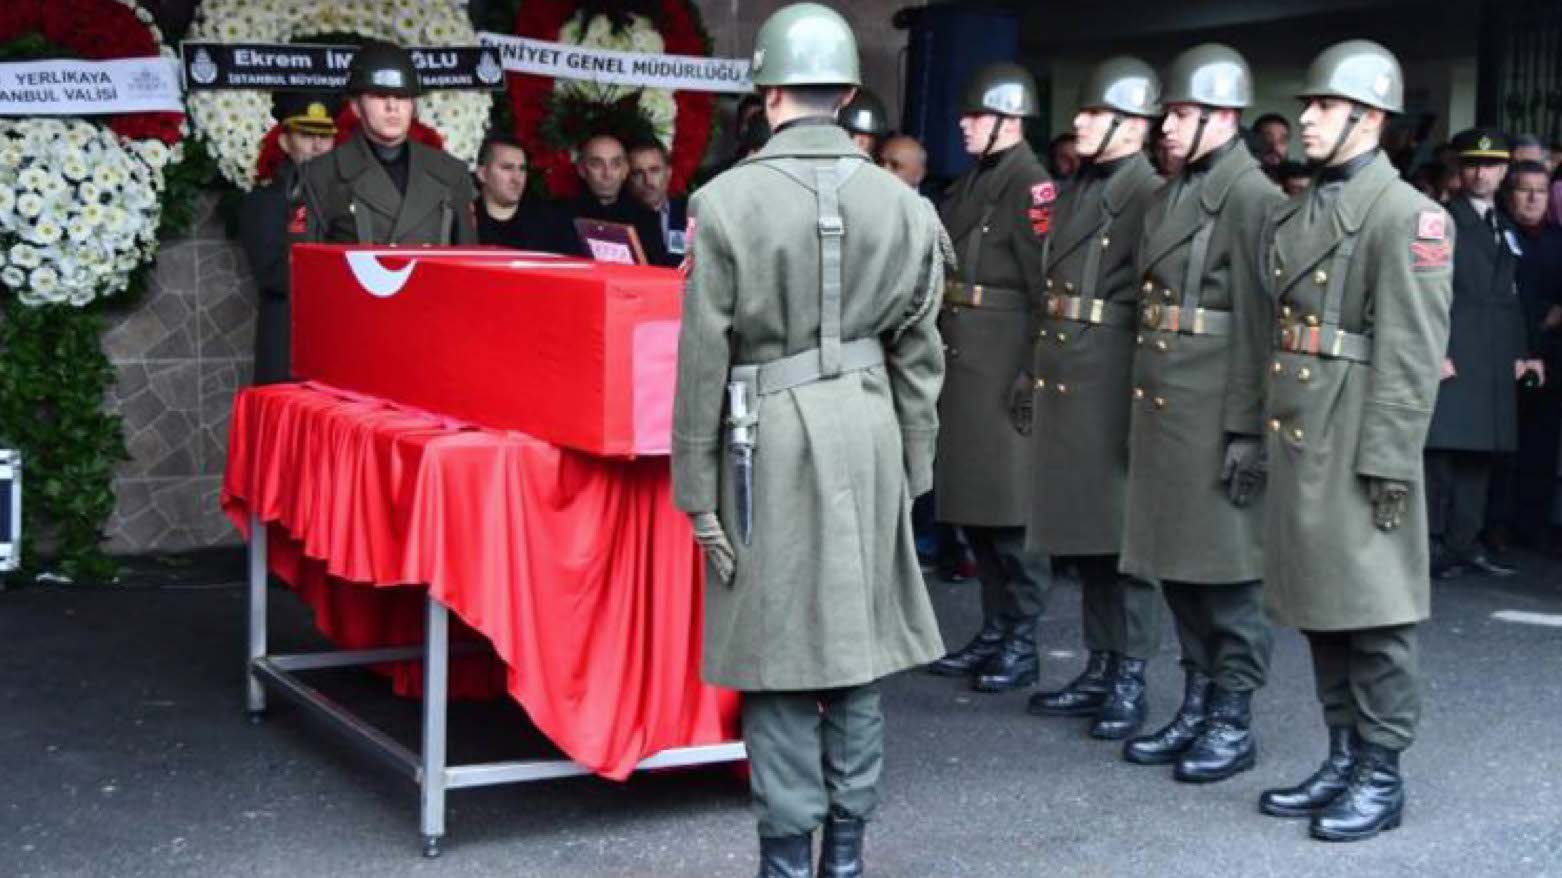 Ceremony farewell to the body of a Turkish soldier who was killed by the PKK. (Photo: AFP)